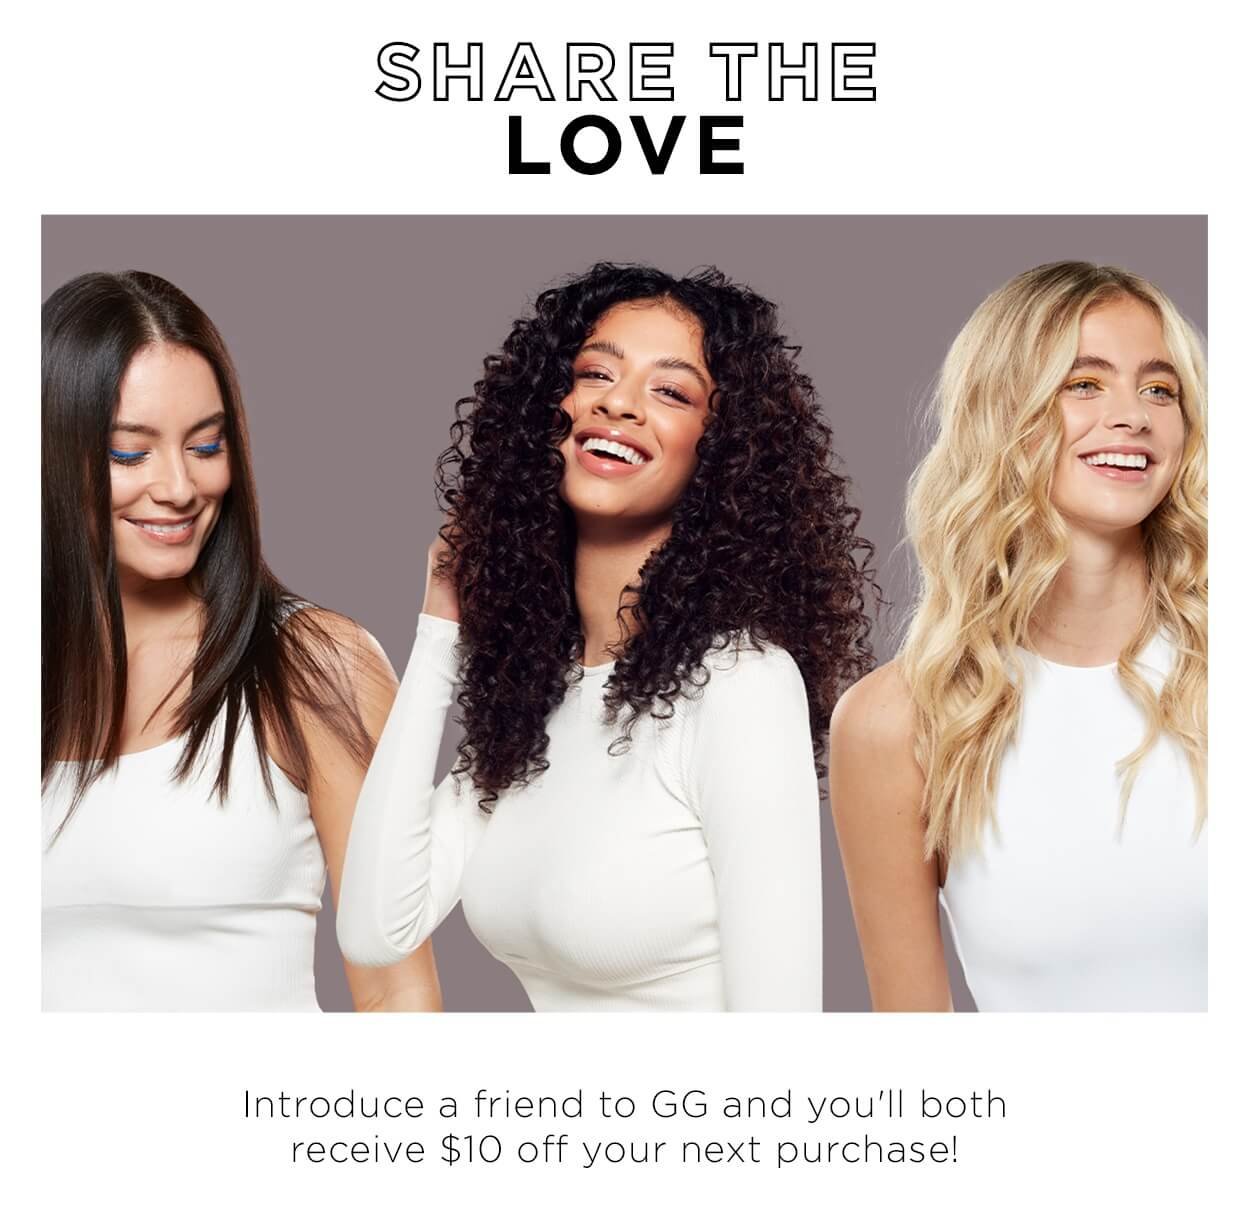 Introduce a friend to GG and you both get 10 dollars off